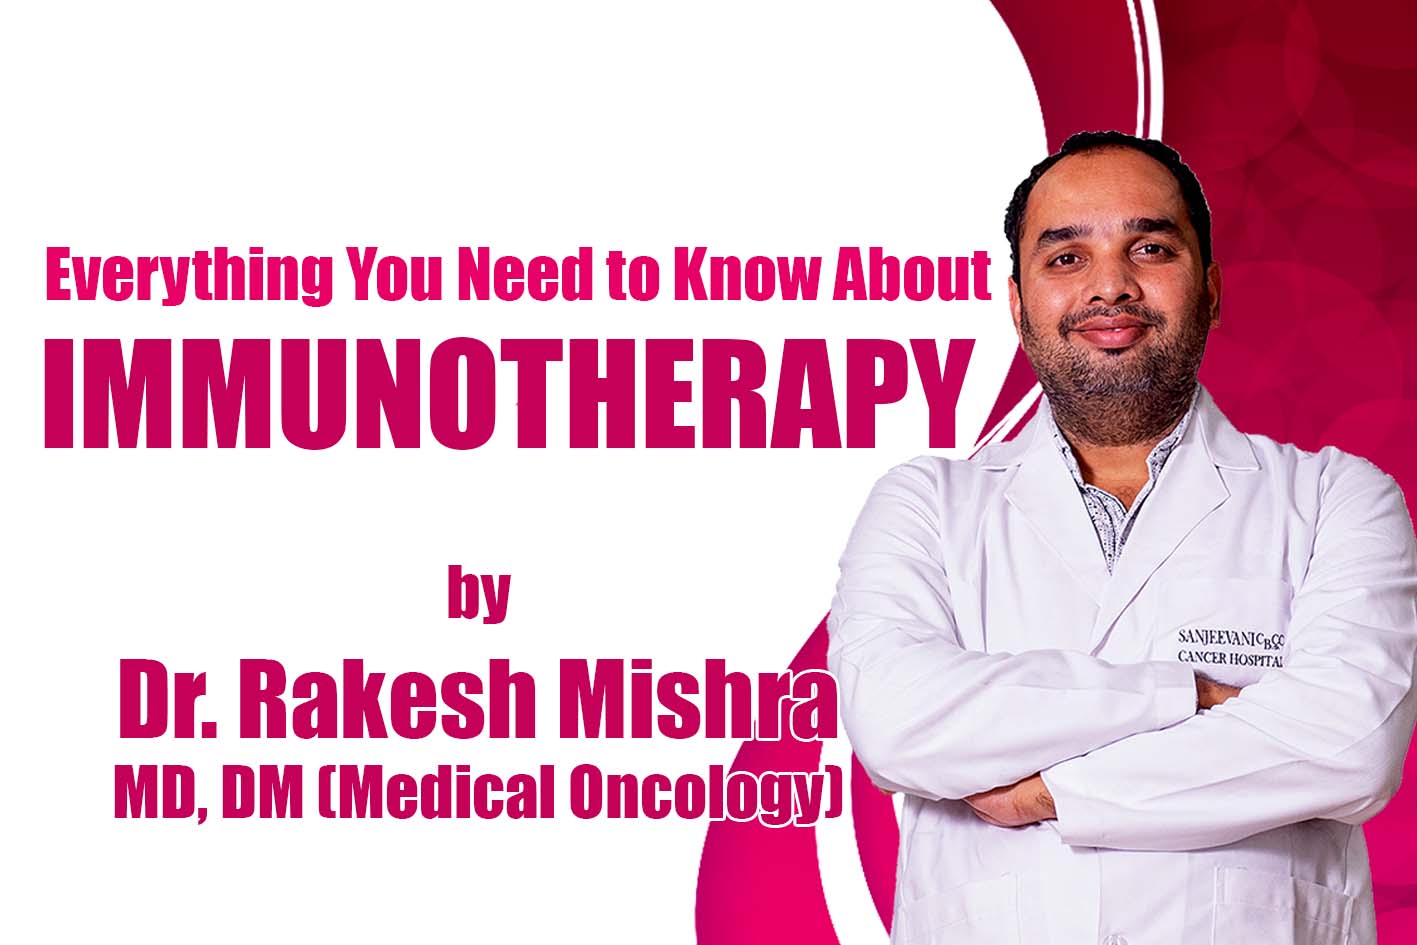 Immunotherapy: Everything You Need to Know